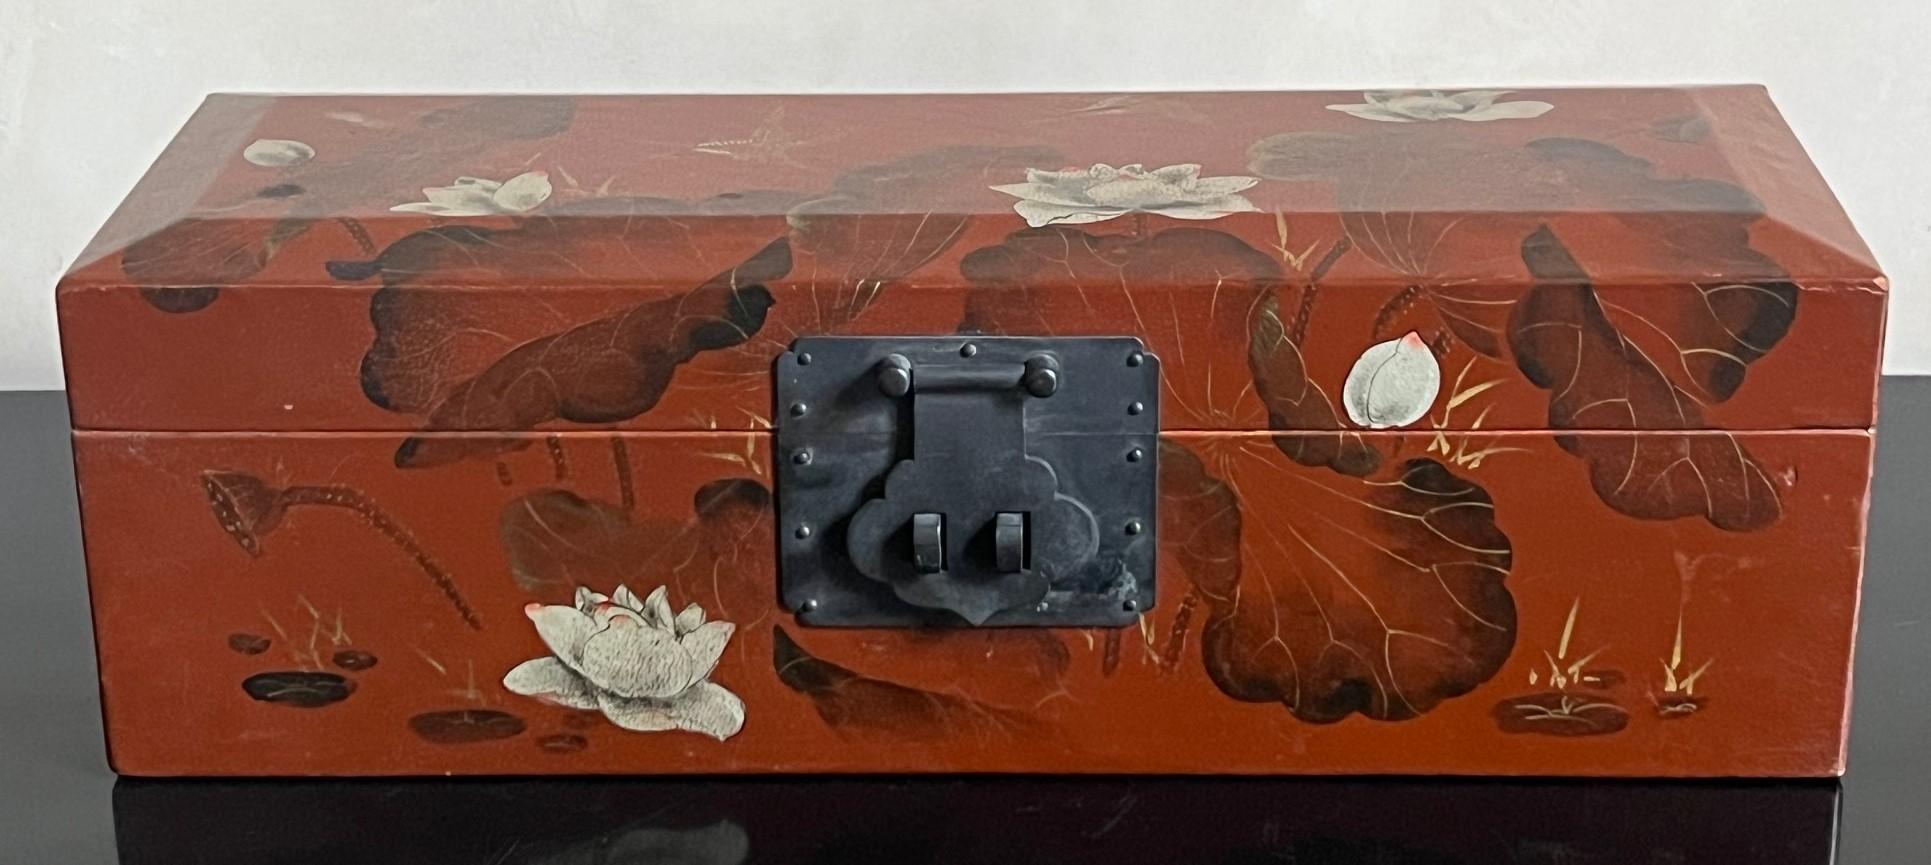 Hand Painted Leather Mounted Box with Metal Hardware In Good Condition For Sale In Ross, CA